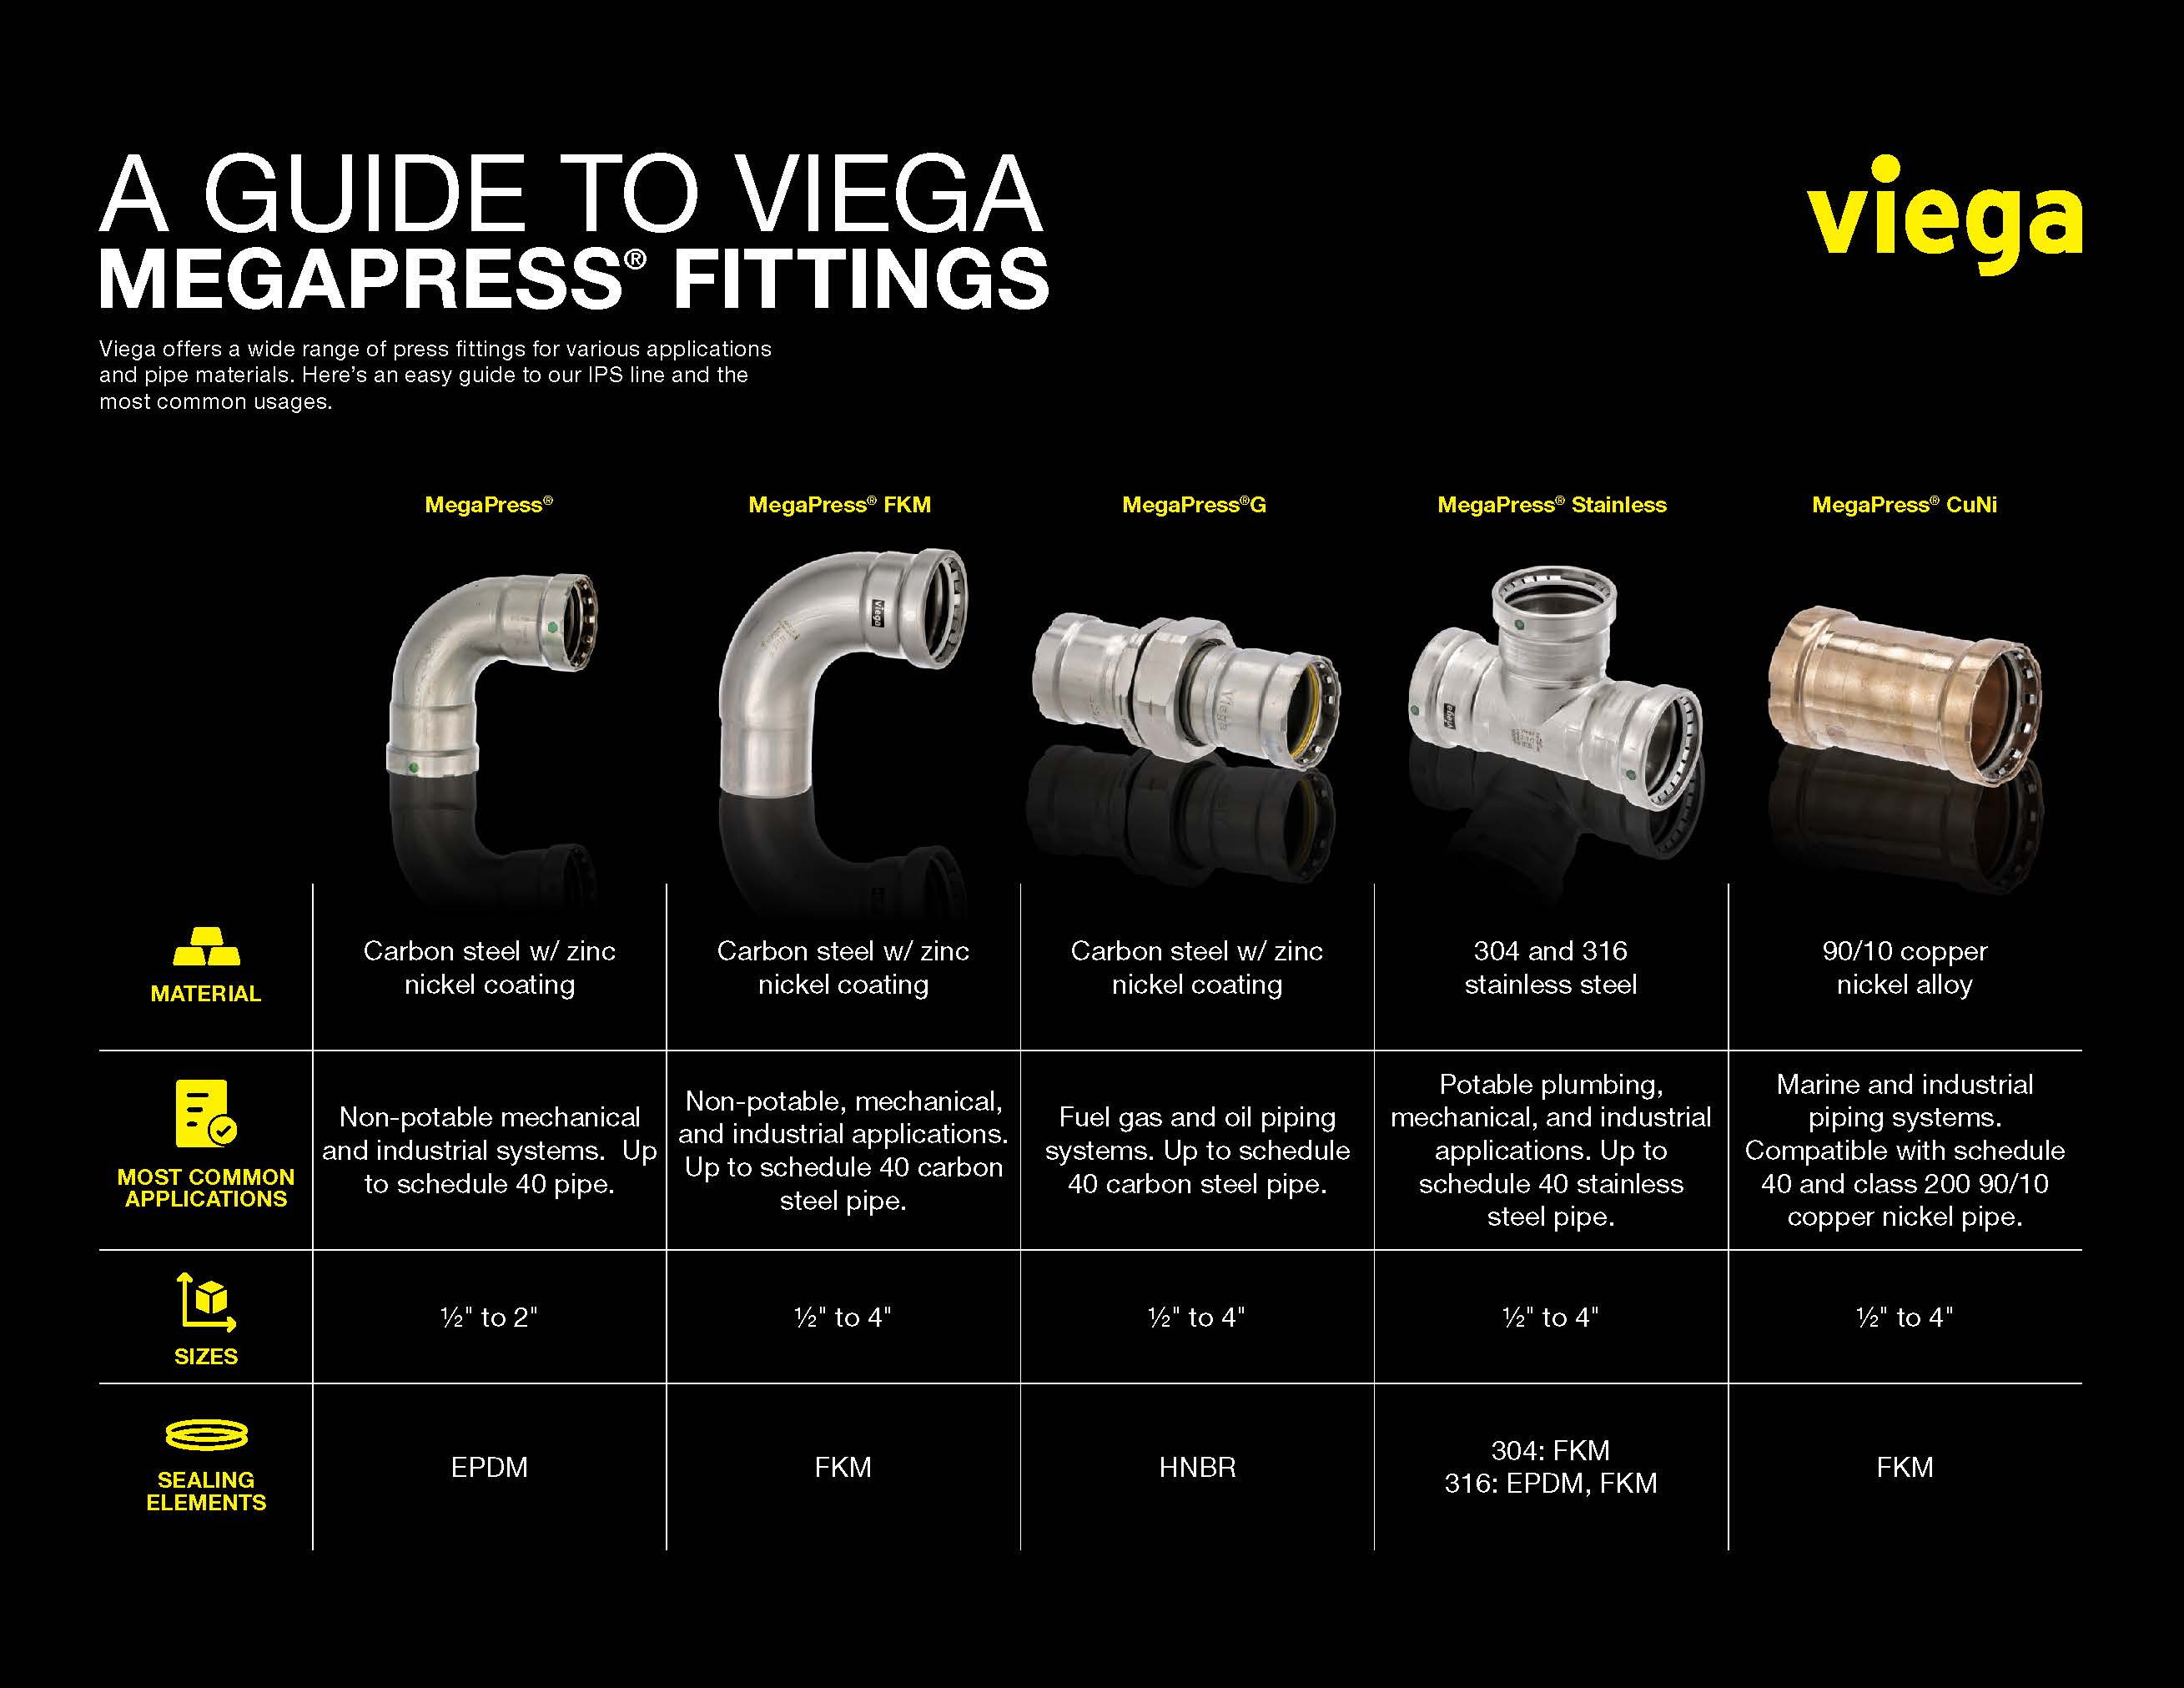 A guide to MegaPress fittings